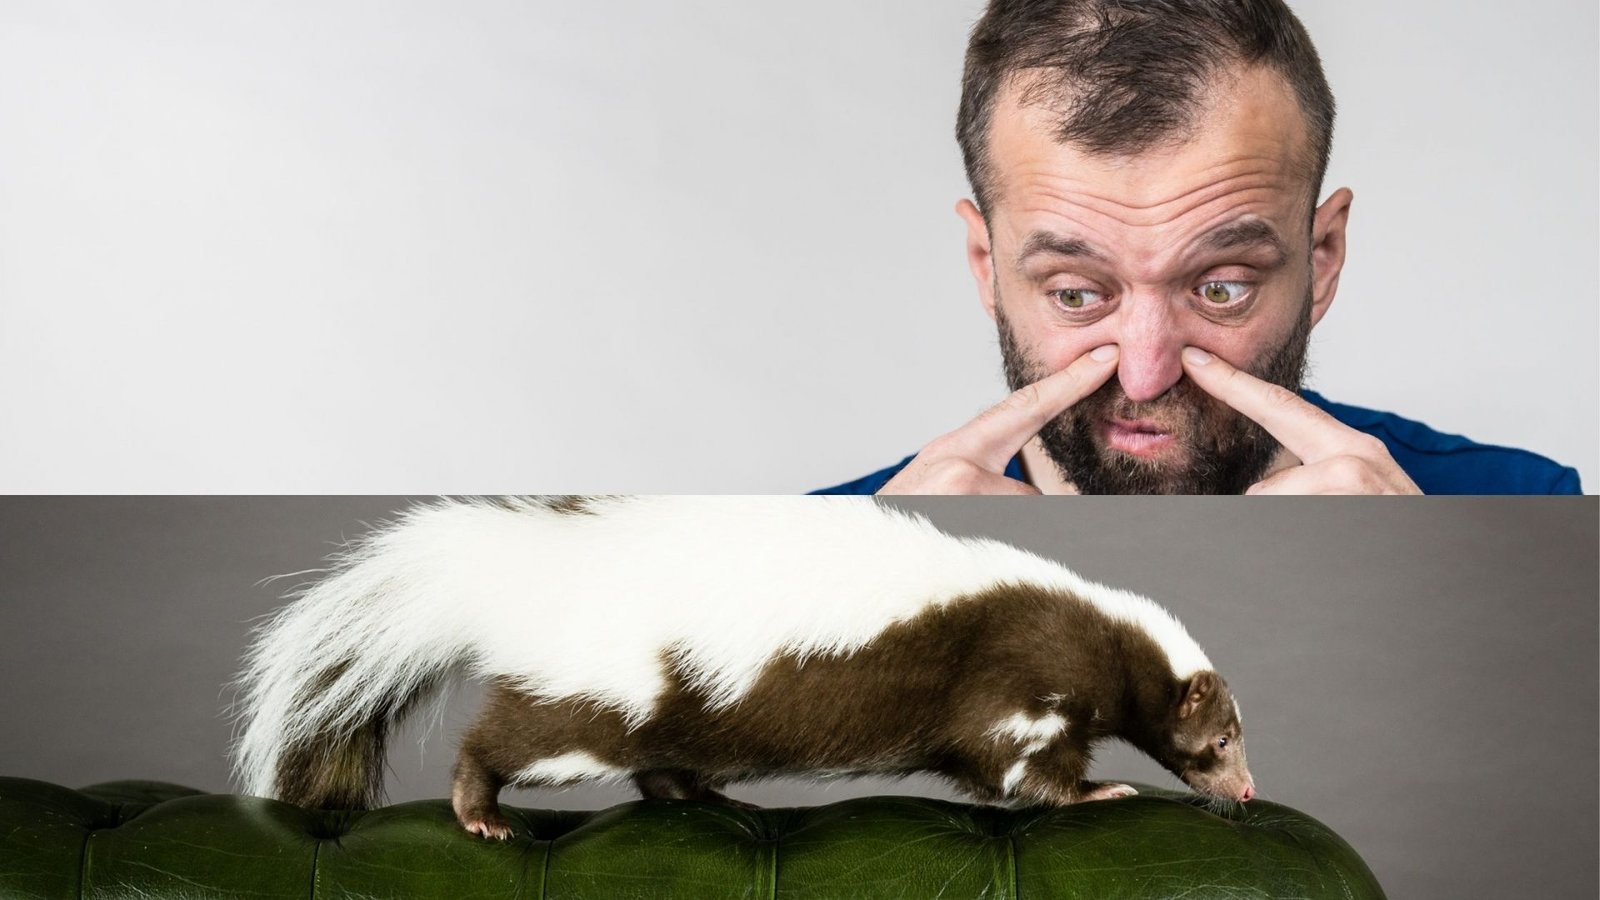 Does Home Insurance Protect Against Skunk’s Smell?